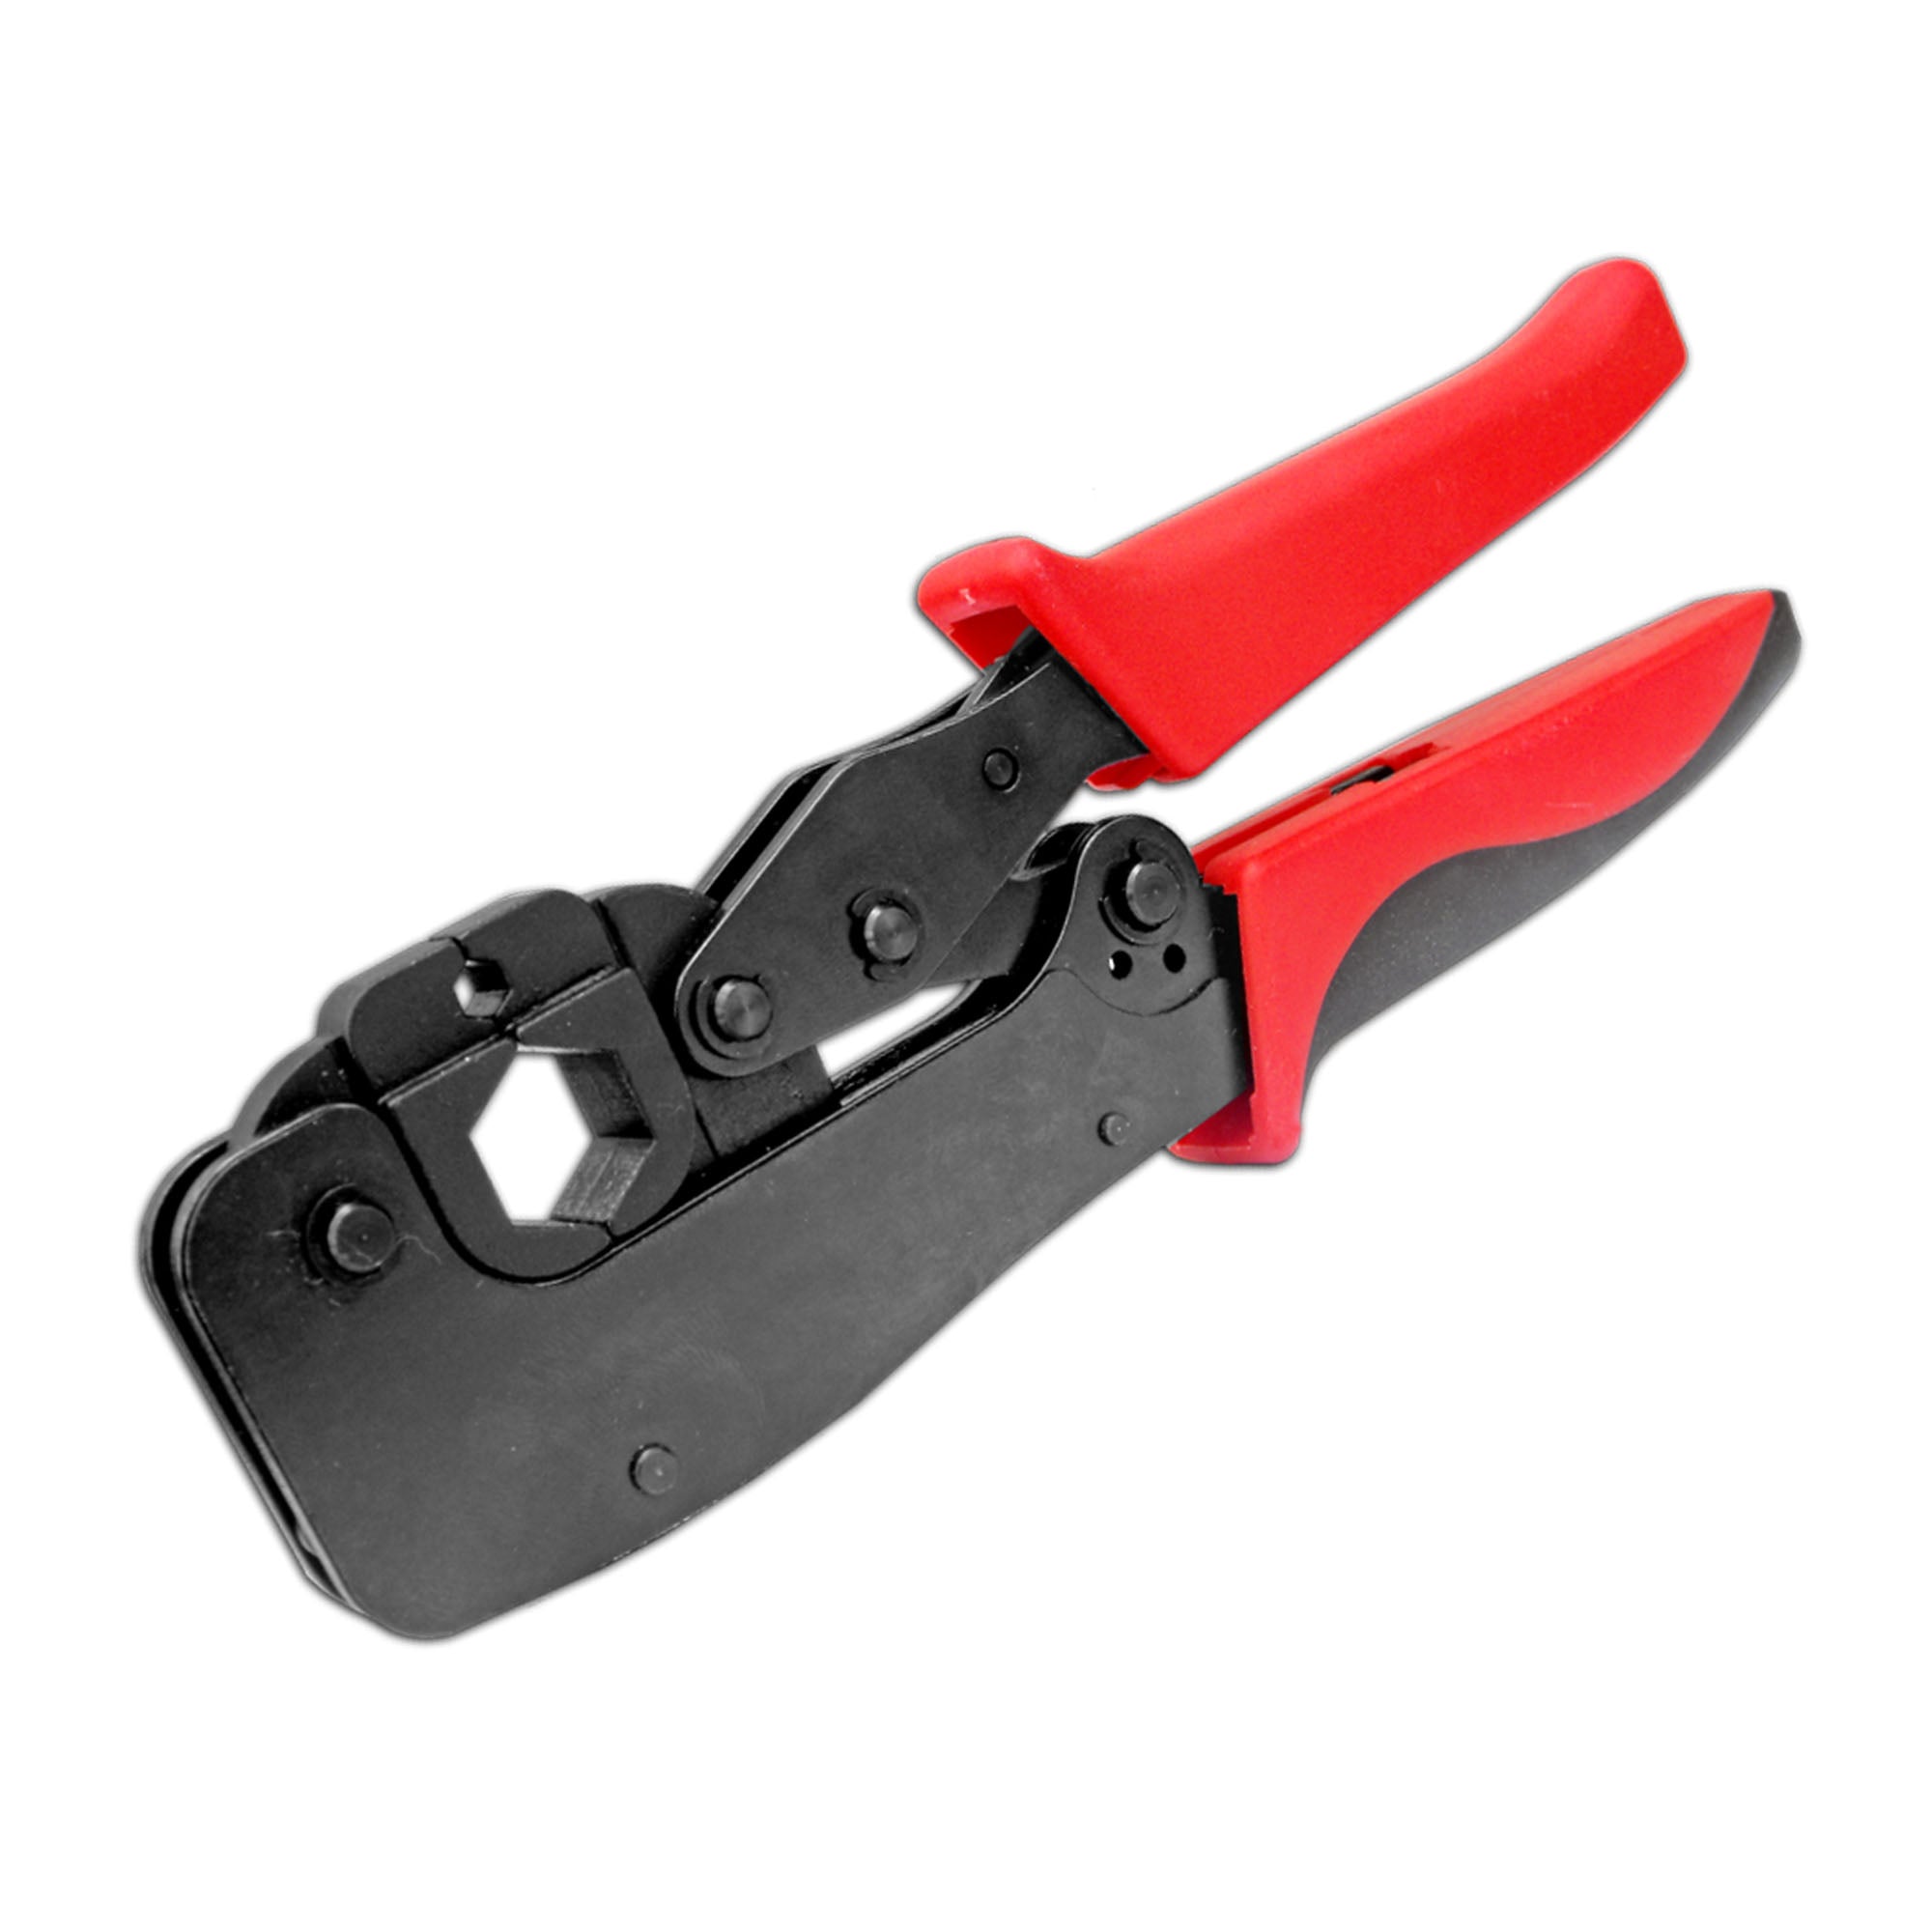 SureCall Cable Crimping Tool for use with LMR600/SC600 Coaxial Cable and SC-CN-16 Connectors